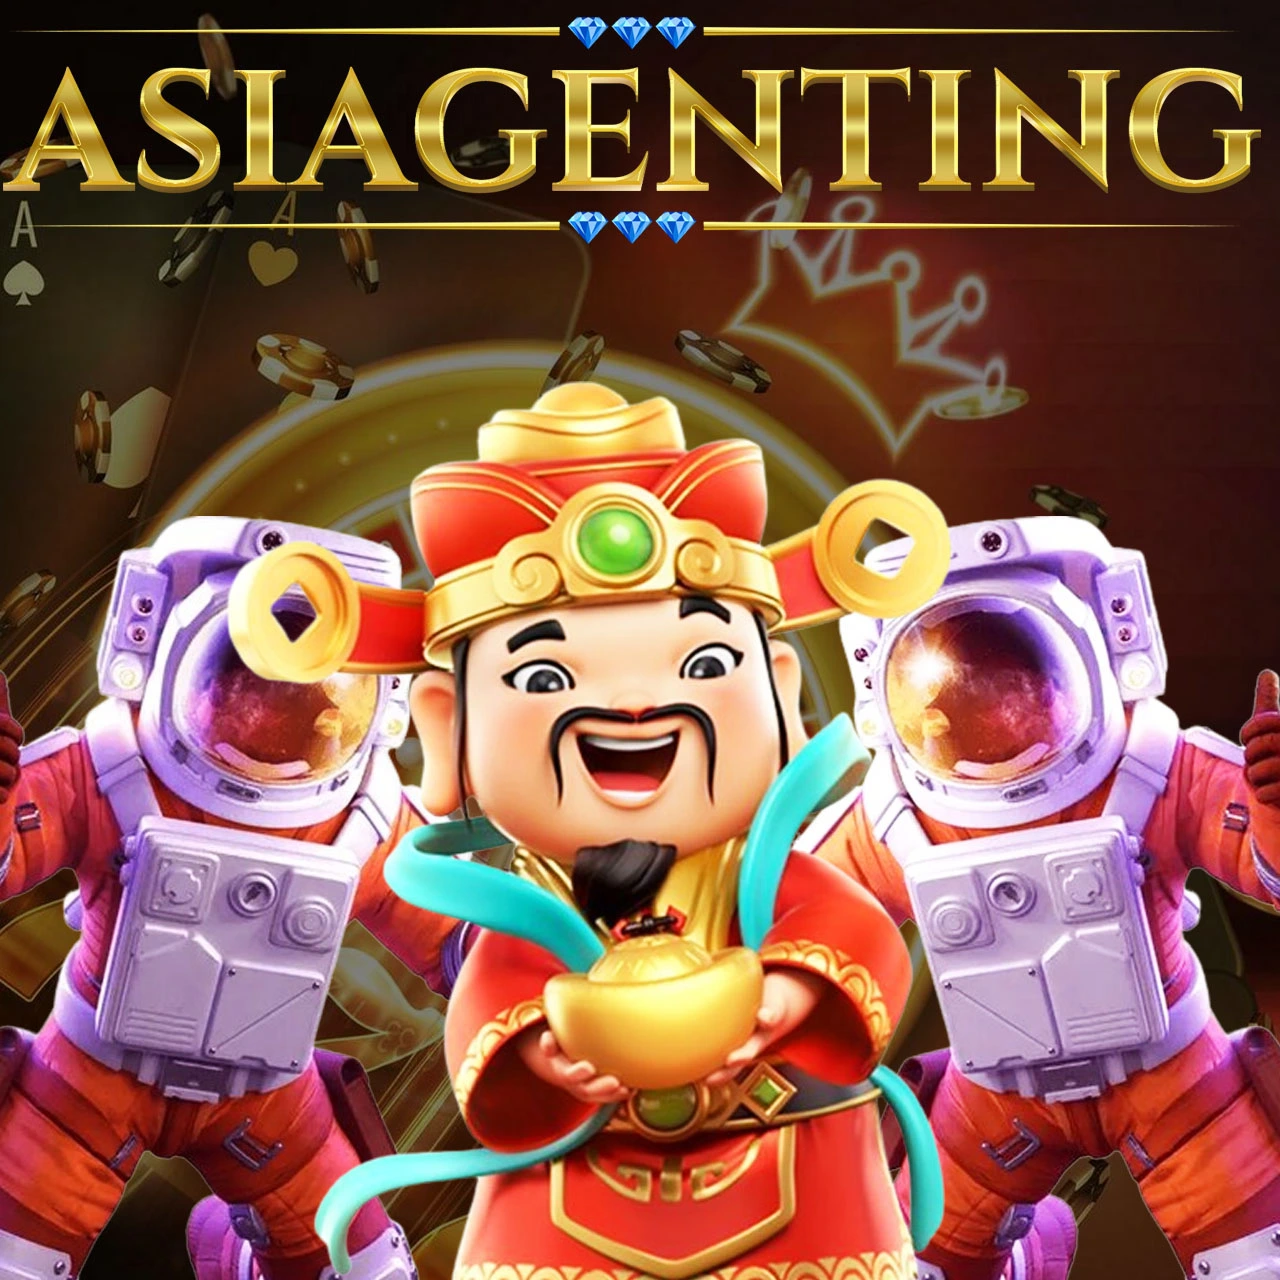 AsiaGenting